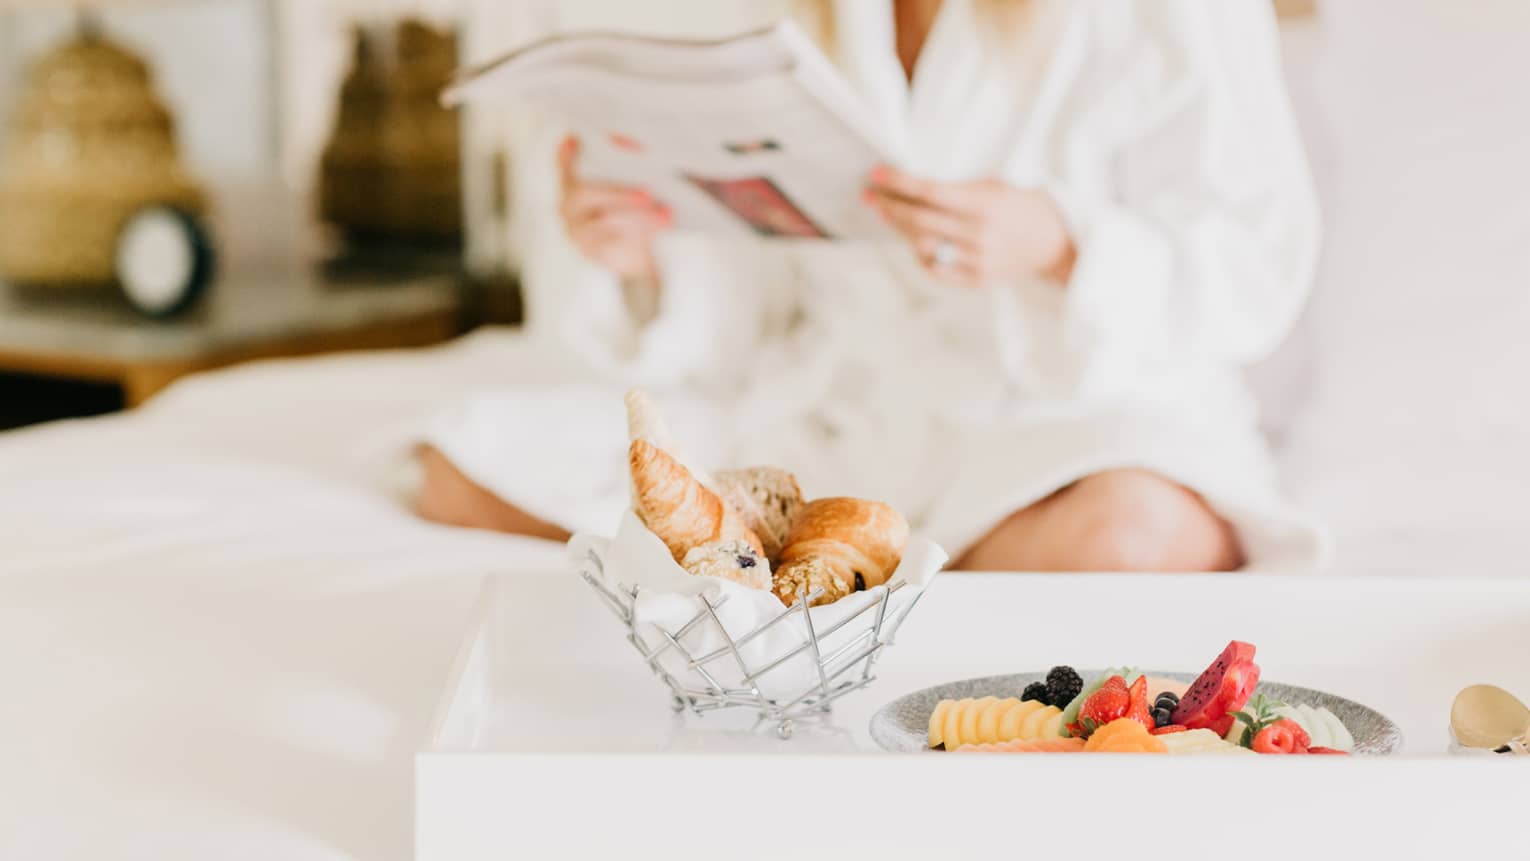 Pastries, fruit on in room dining tray, woman wearing white bath robe reads in background